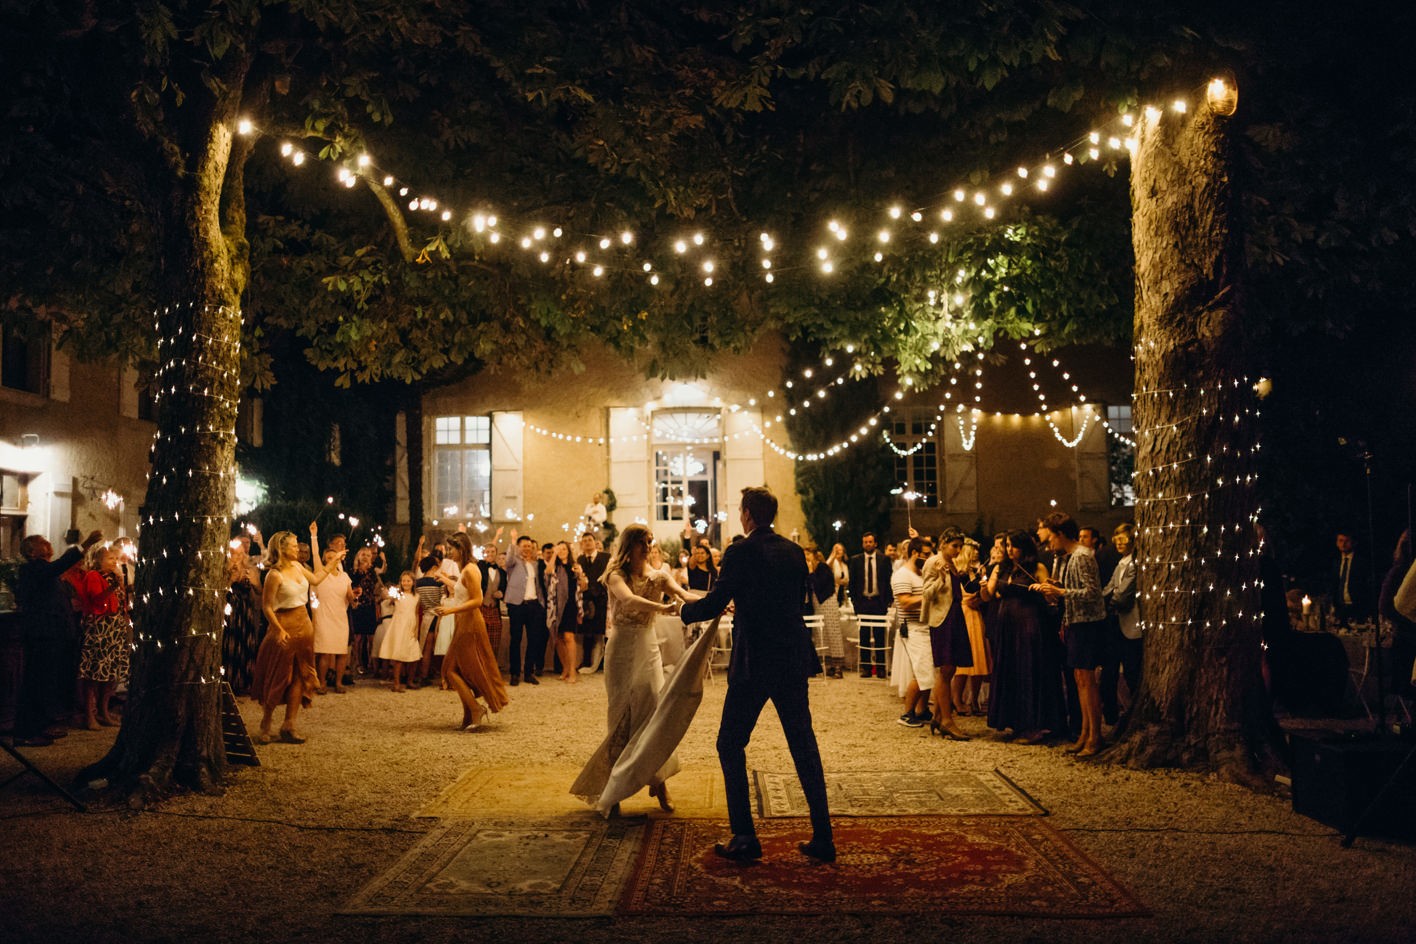 First dance lit up by festoon lighting at Chateau Lartigolle in South west France